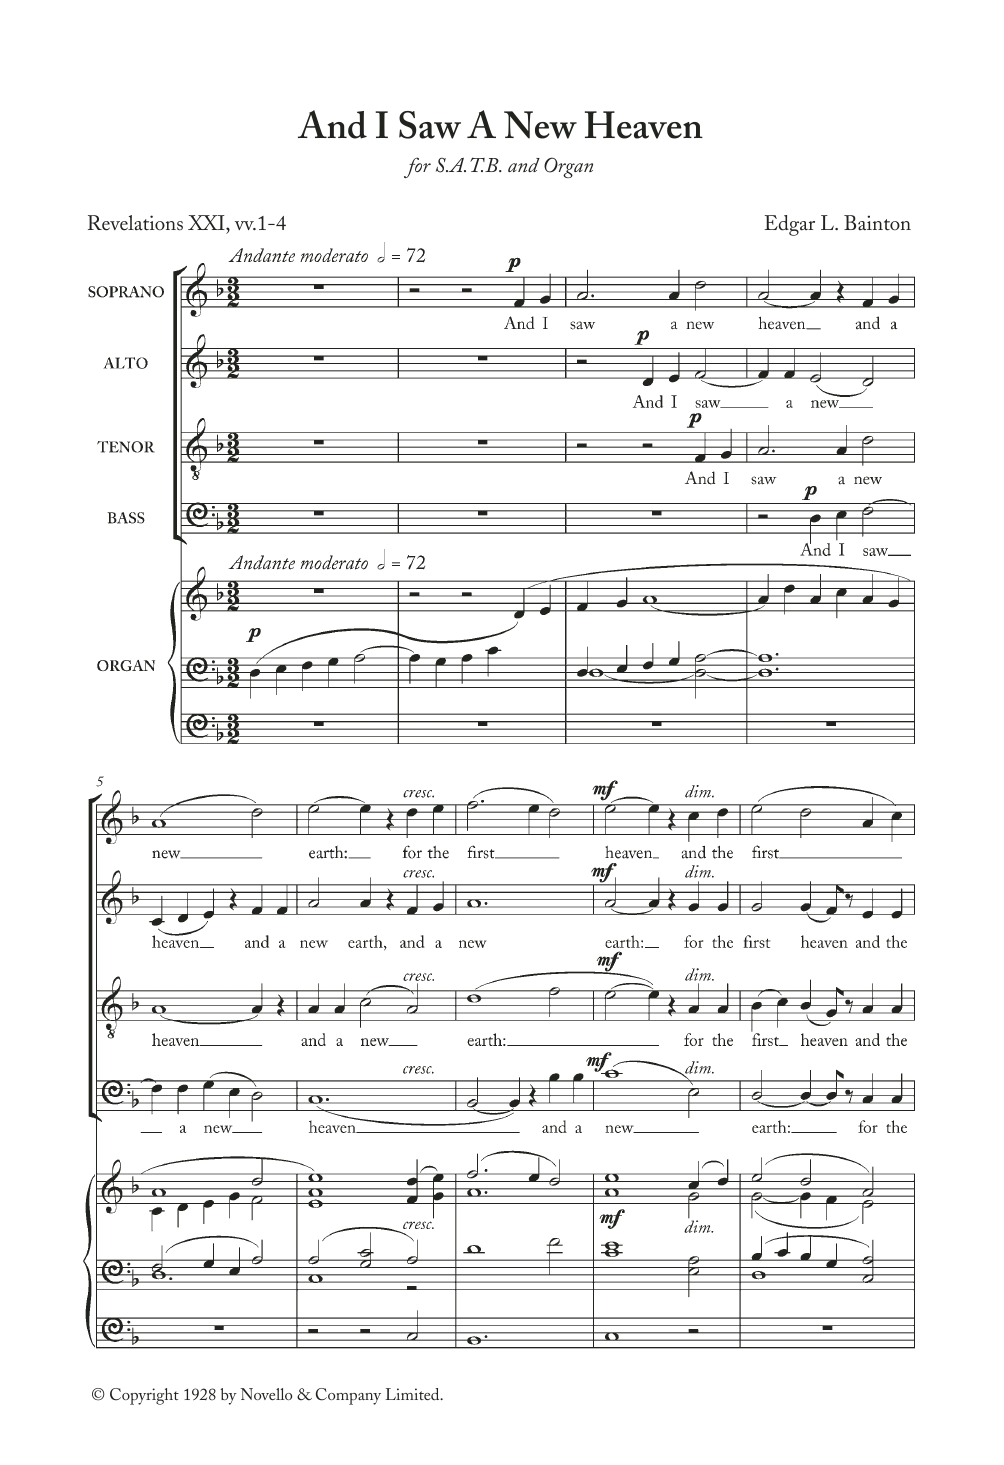 Download Edgar Bainton And I Saw A New Heaven Sheet Music